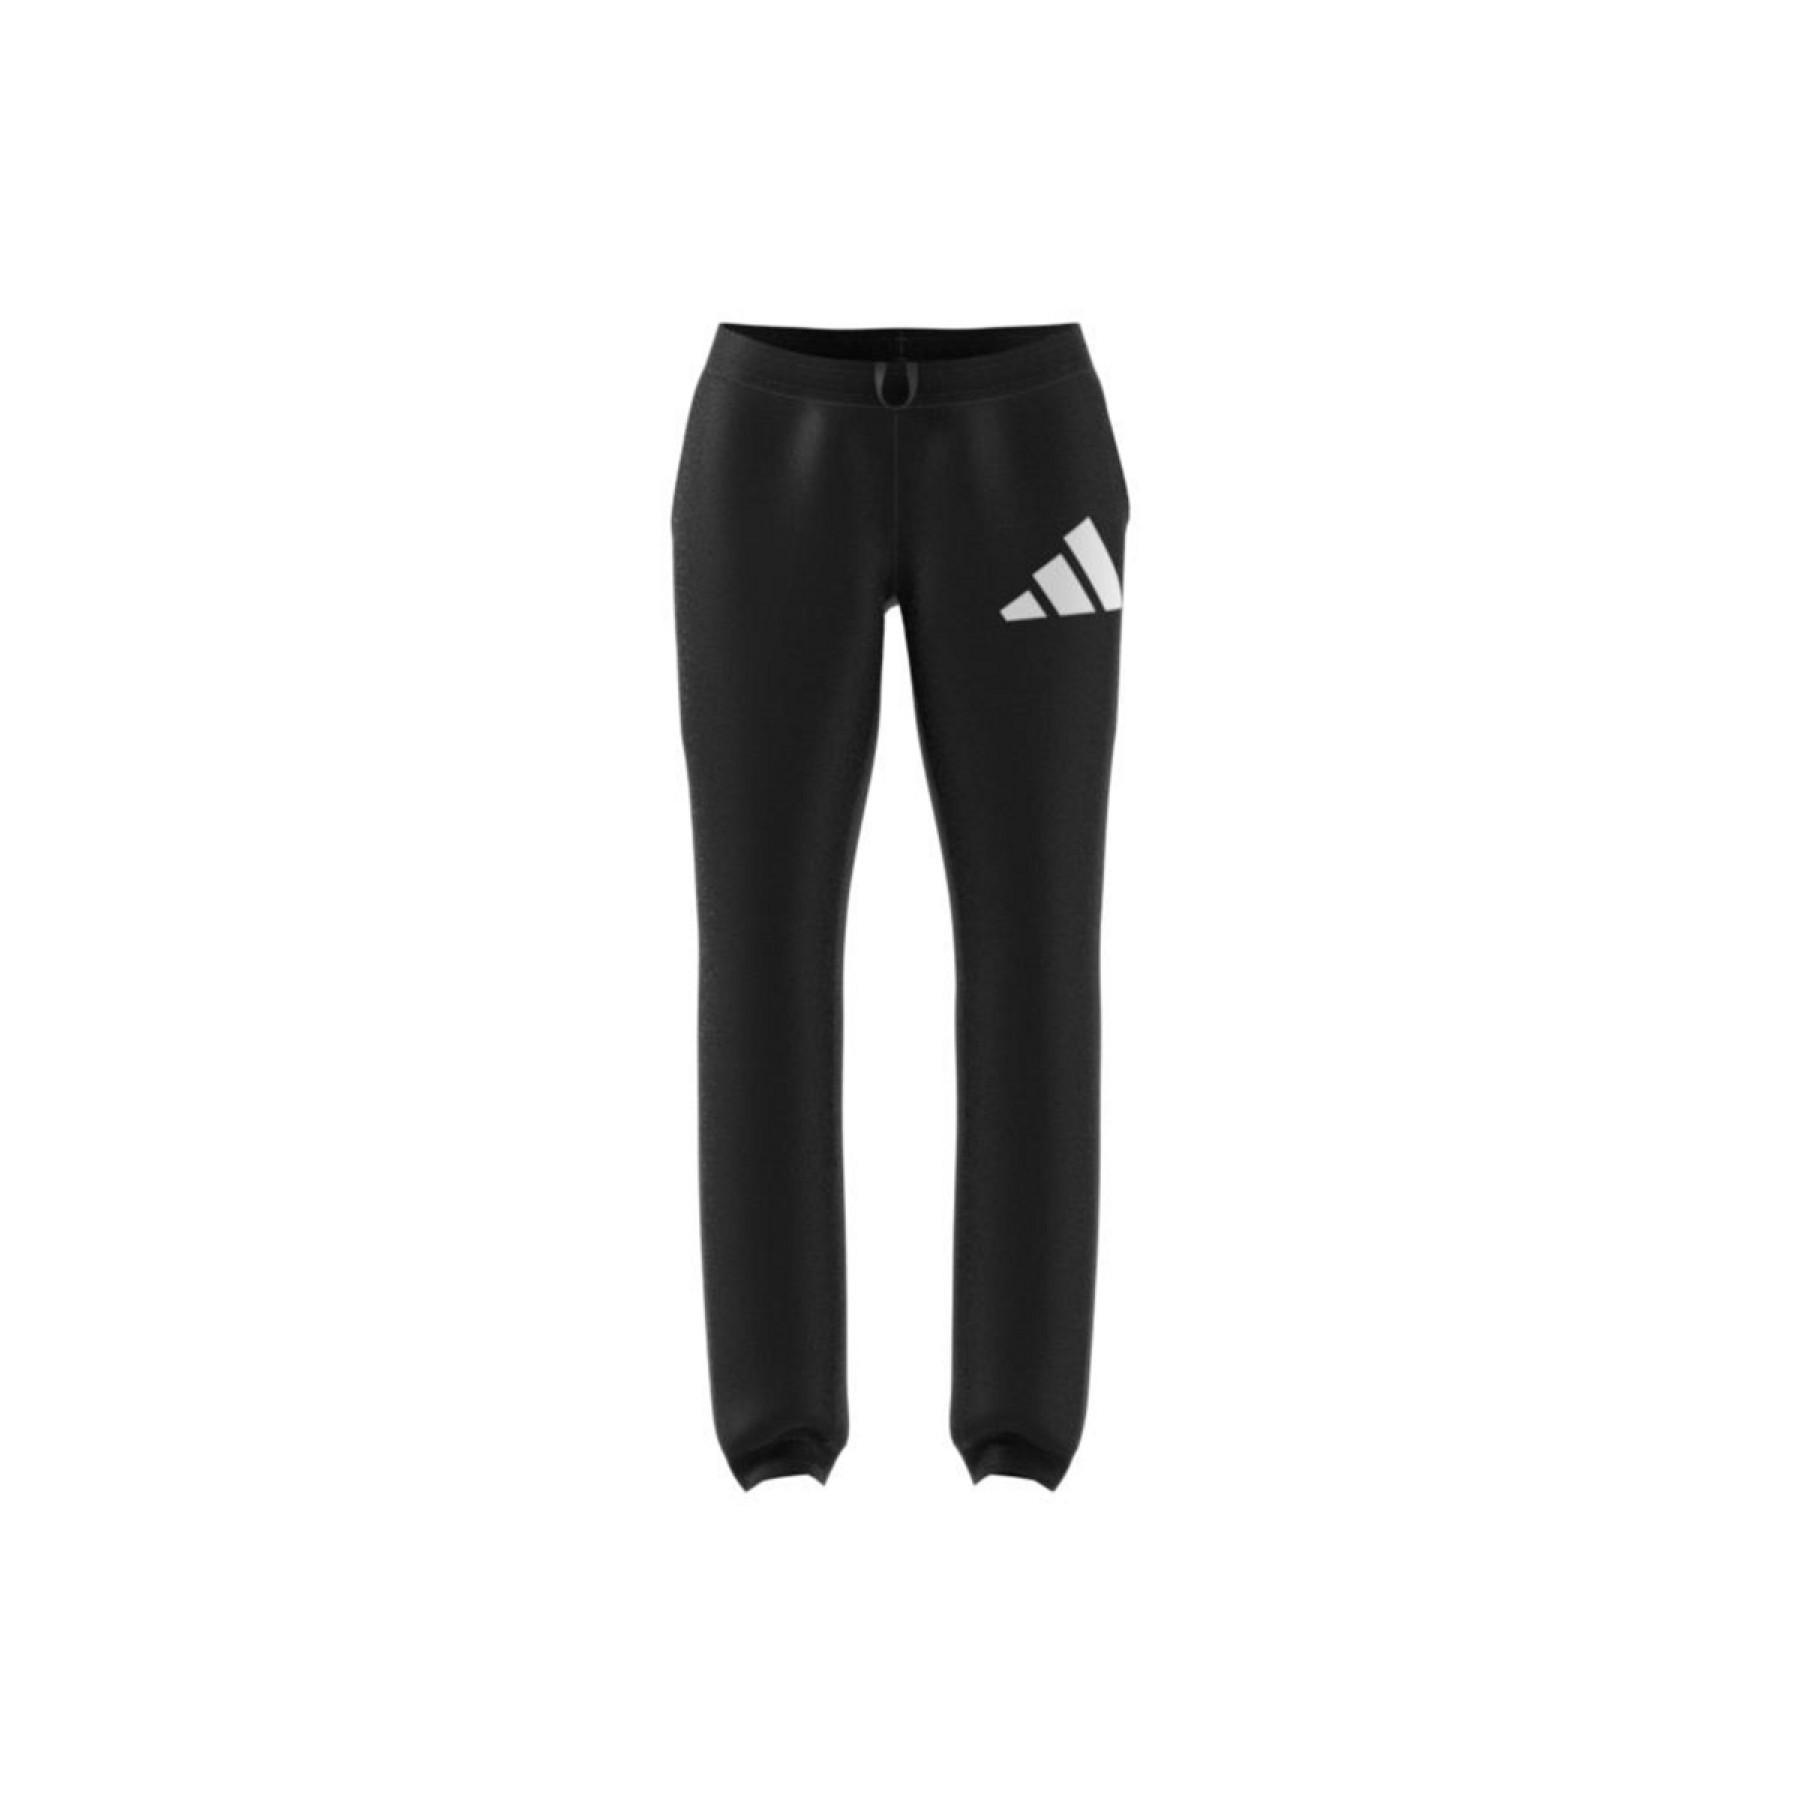 Women's trousers adidas Woven Badge of Sport